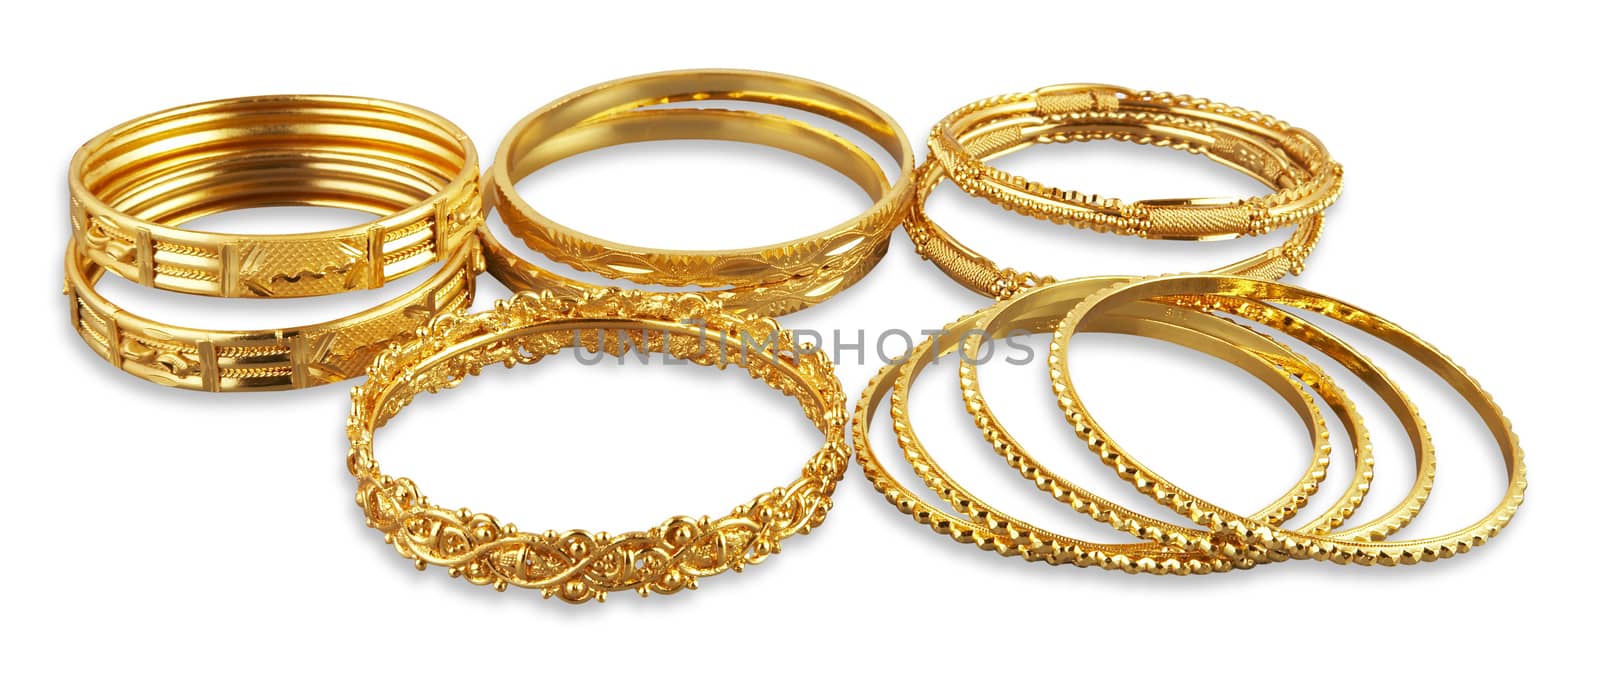 Golden bangles with clipping path